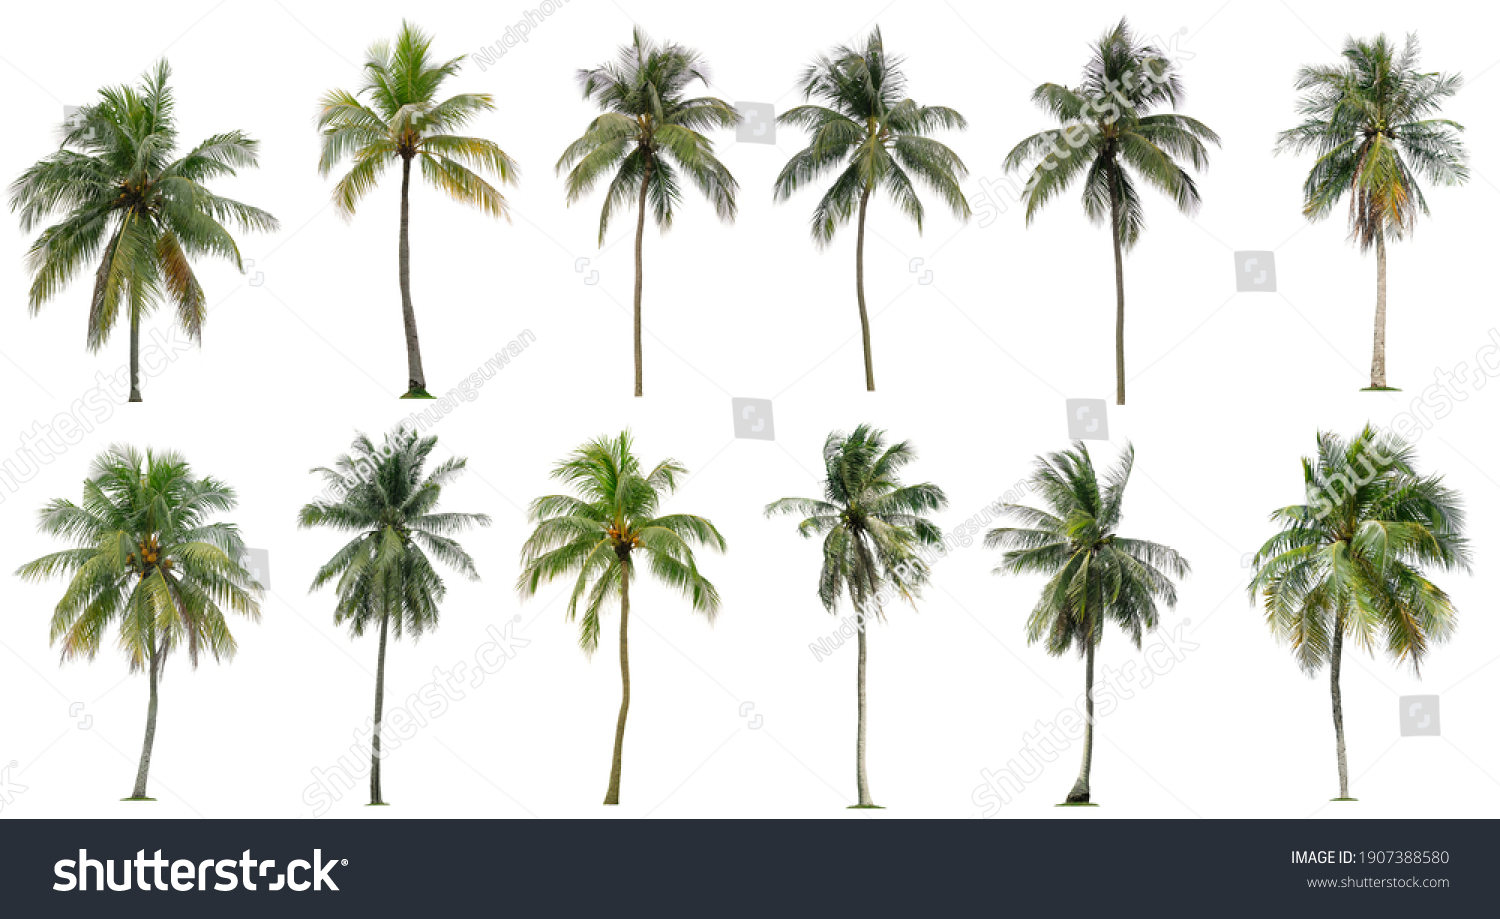 Set of coconut and palm trees isolated on white background, Suitable for use in architectural design, Decoration work, Used with natural articles both on print and website. #1907388580